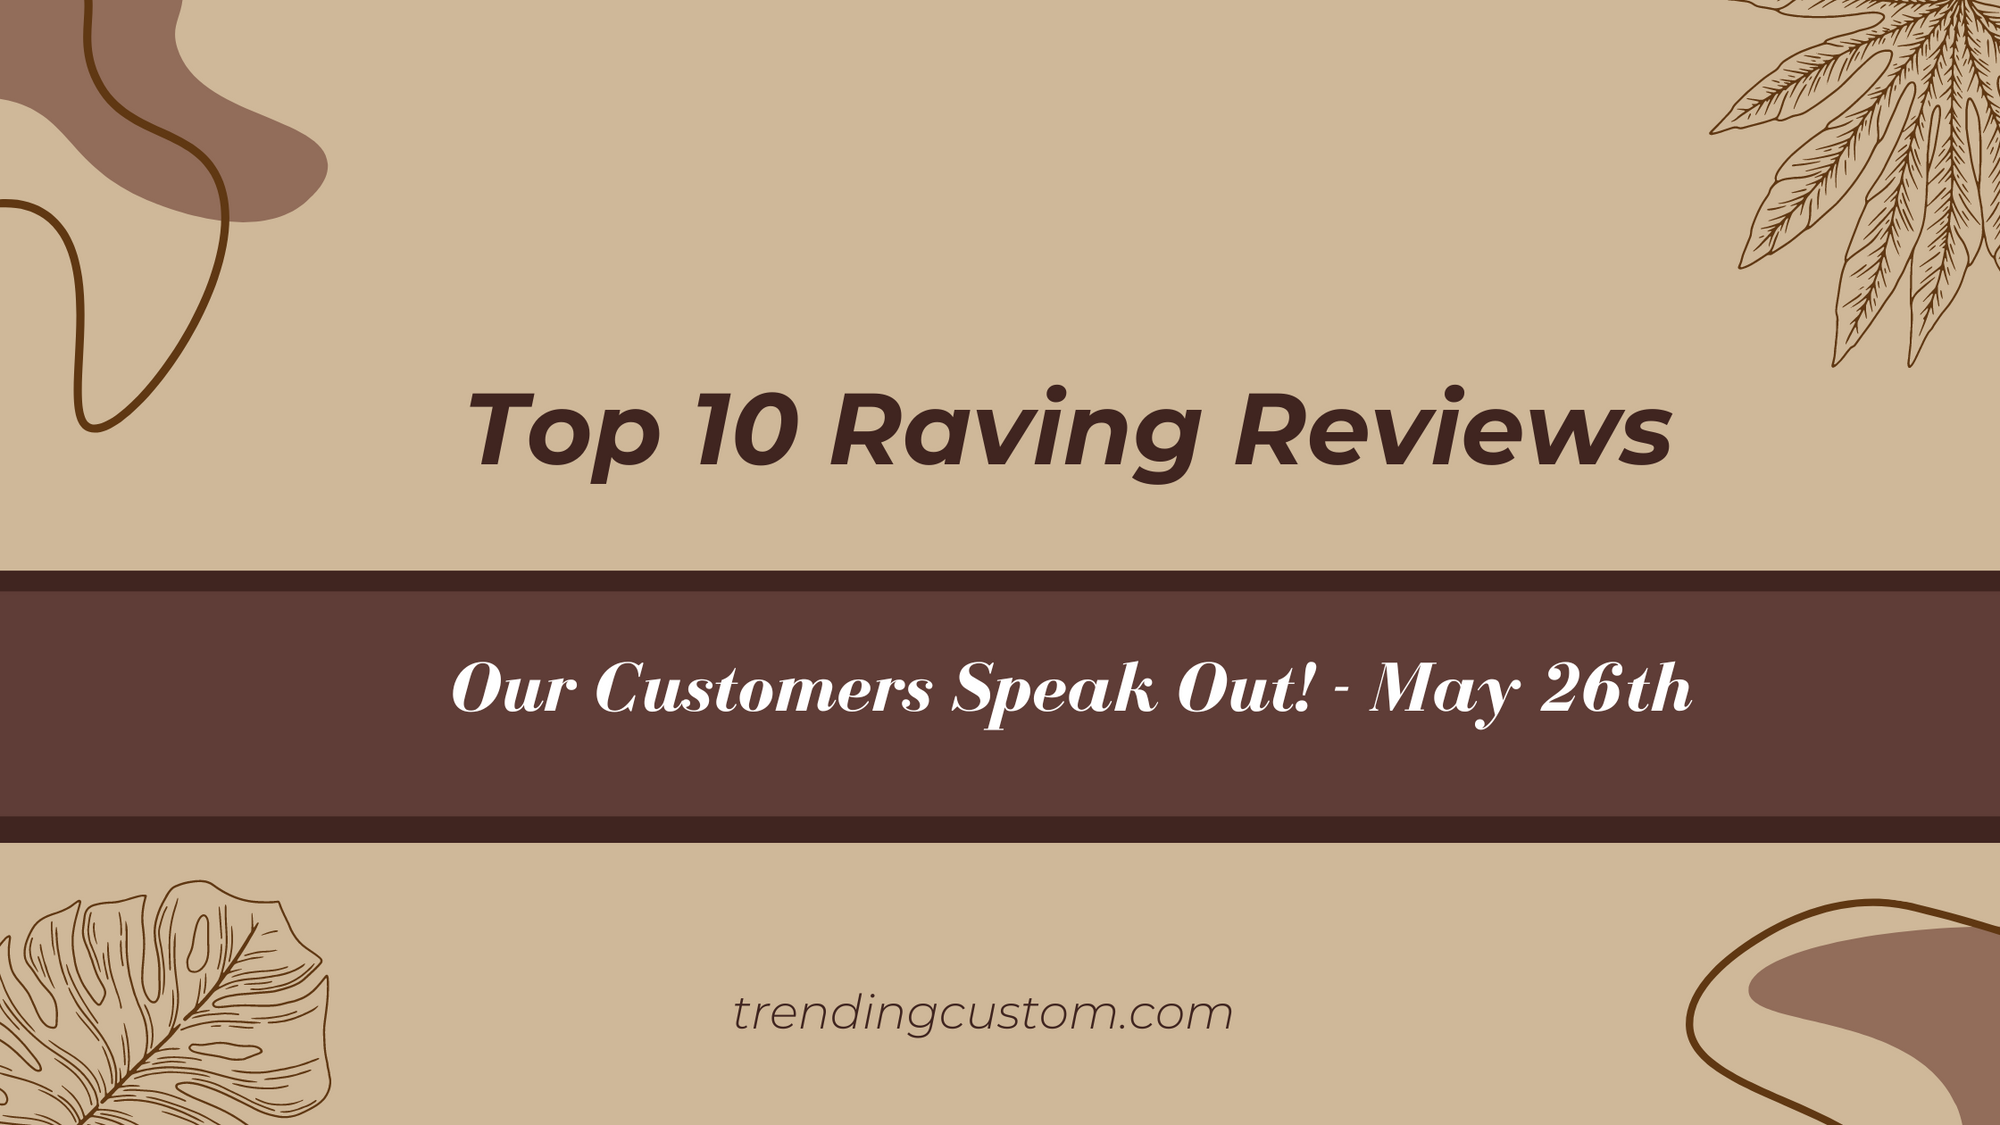 Top 10 Raving Reviews: Our Customers Speak Out! - May 26th